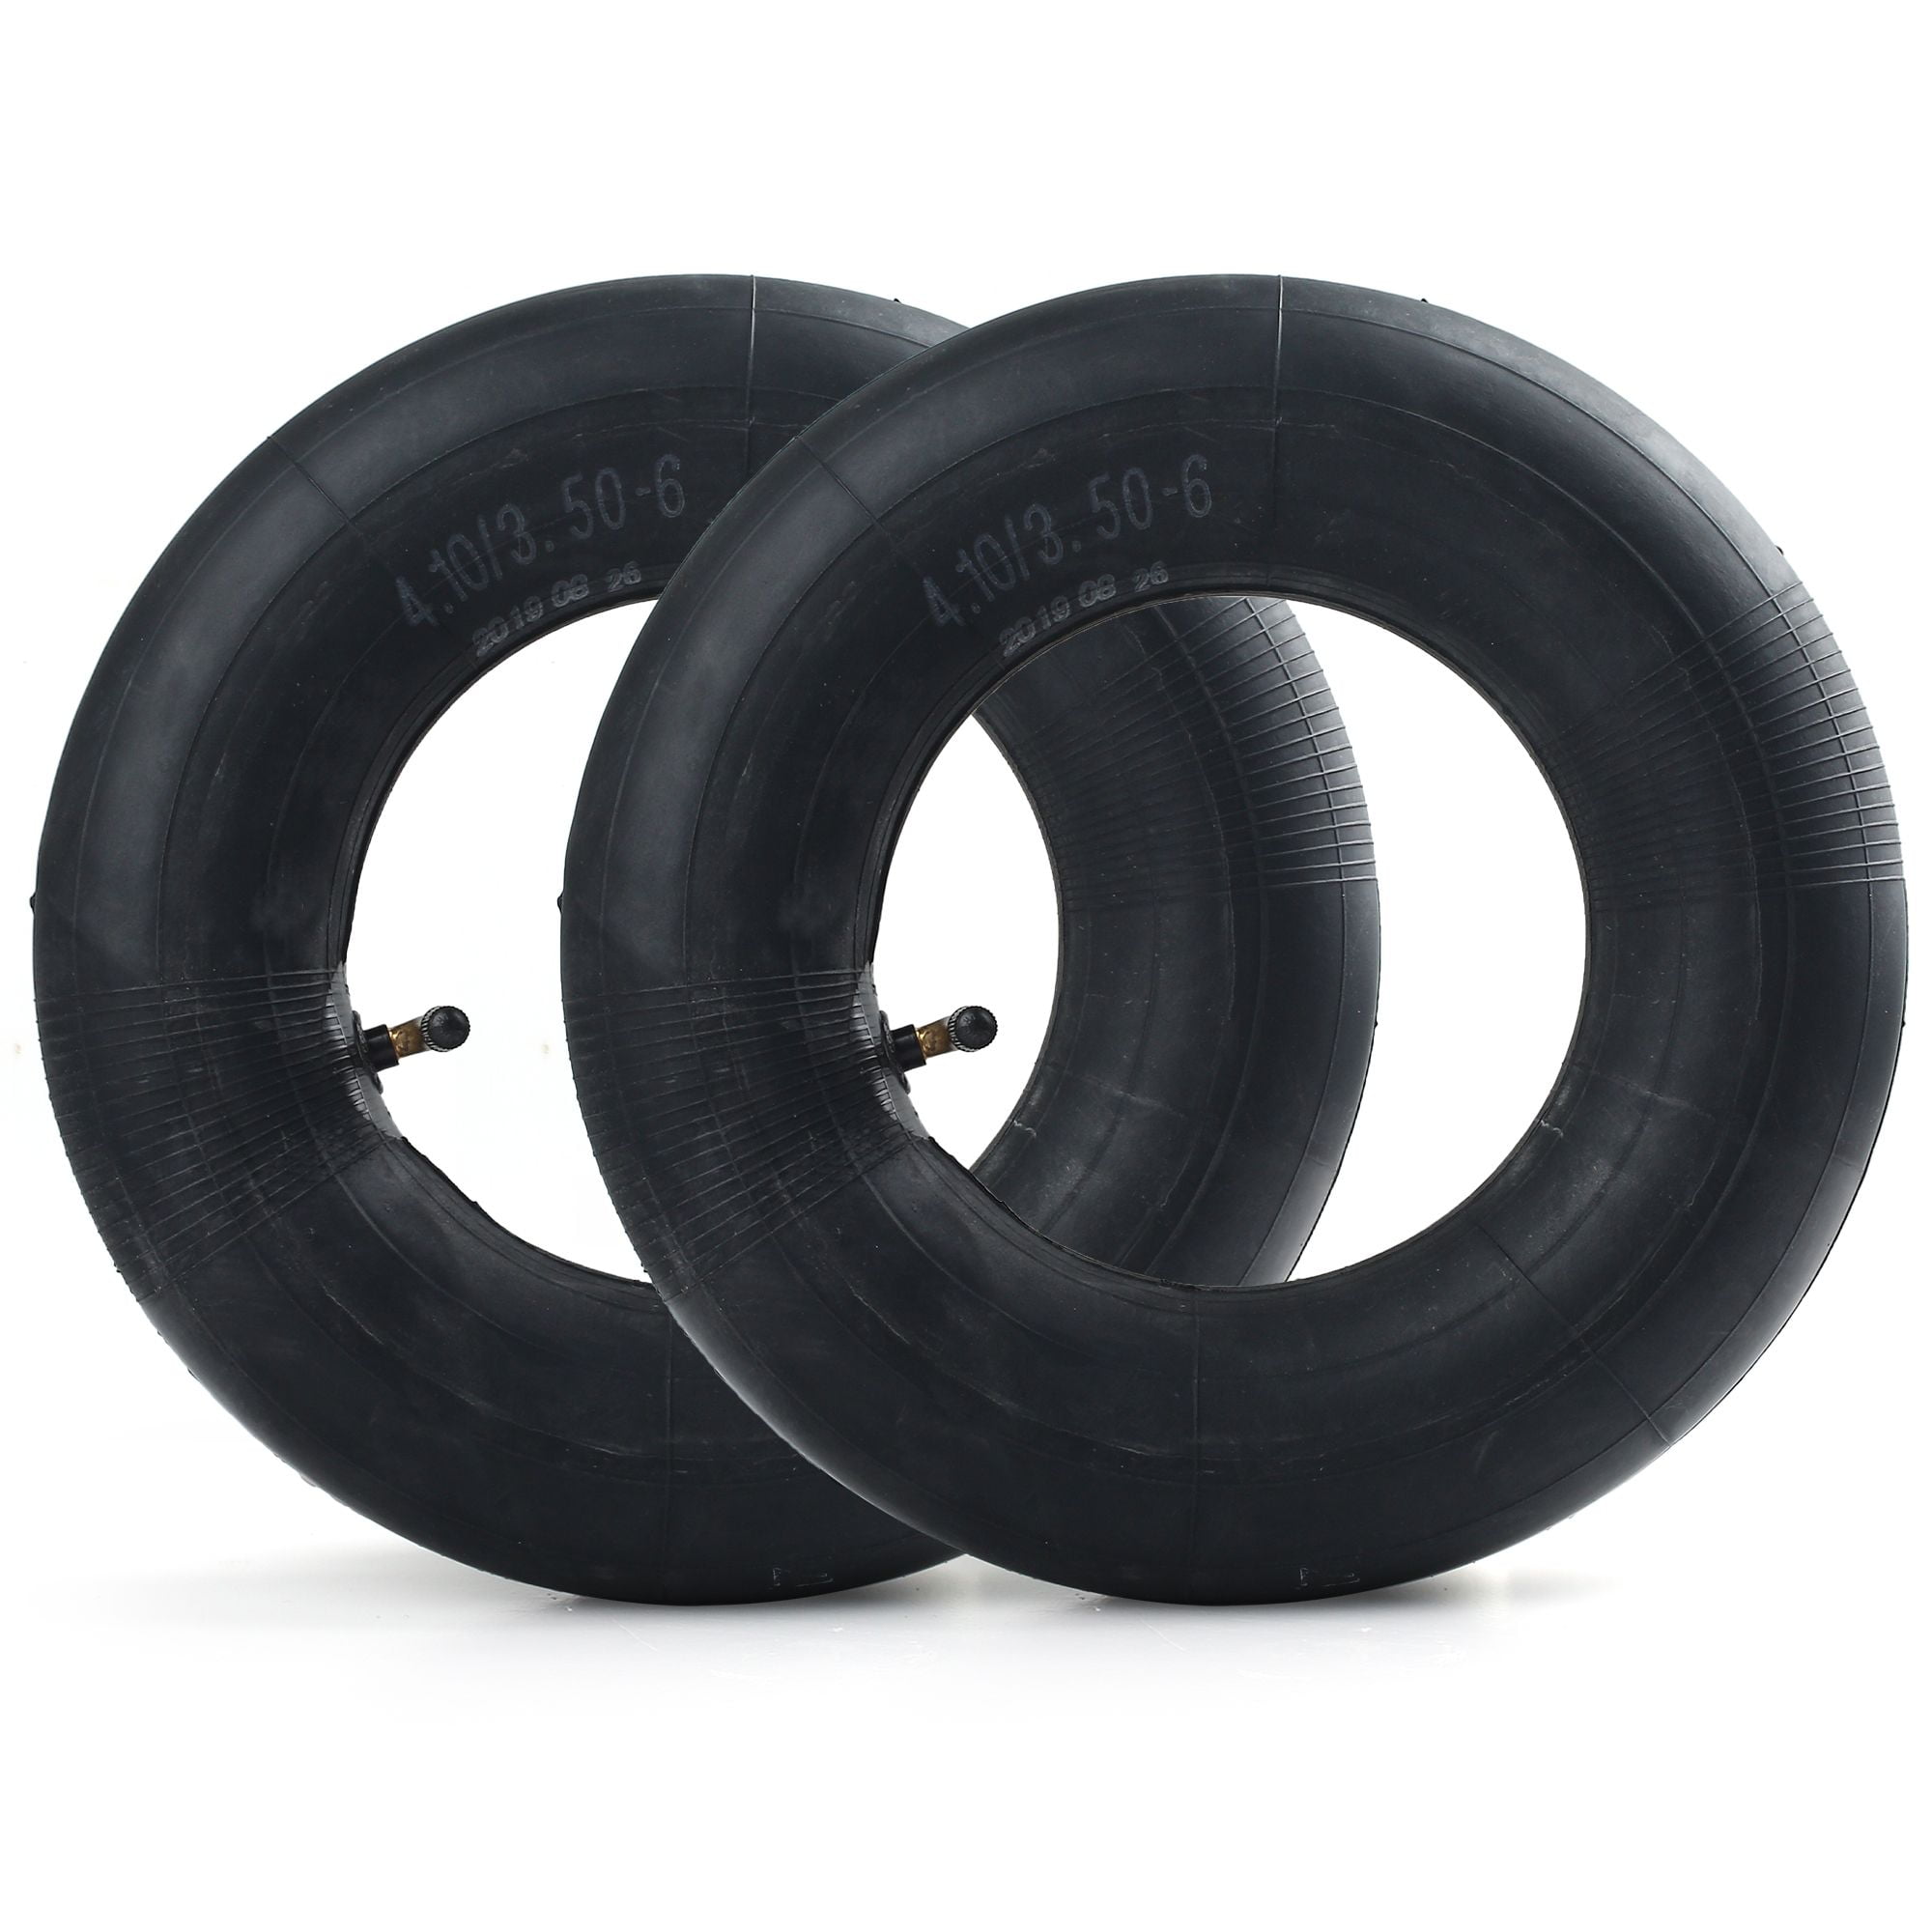 TWO 6 Inner Tube fits tire sizes 4.00-6 4.10-6 14X4-6 14X4.00-6 14X4.